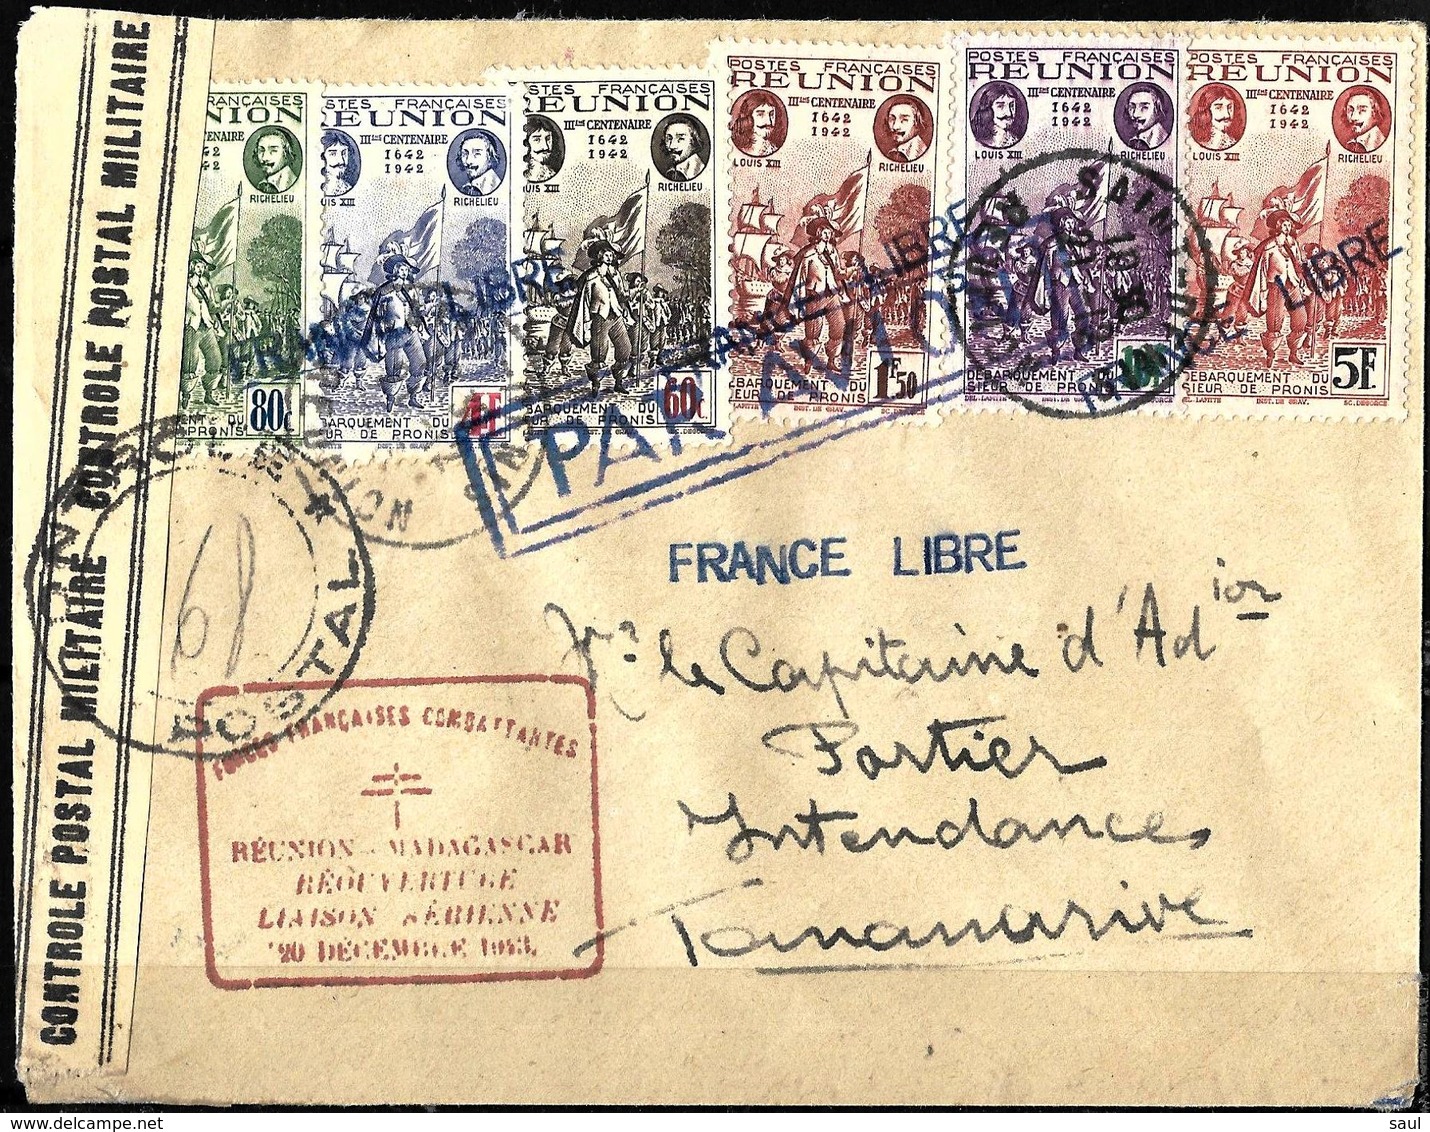 134 - FRANCE - COLONIES - REUNION - 1943 - FULL SET ON COVER - TO CHECK - Non Classificati